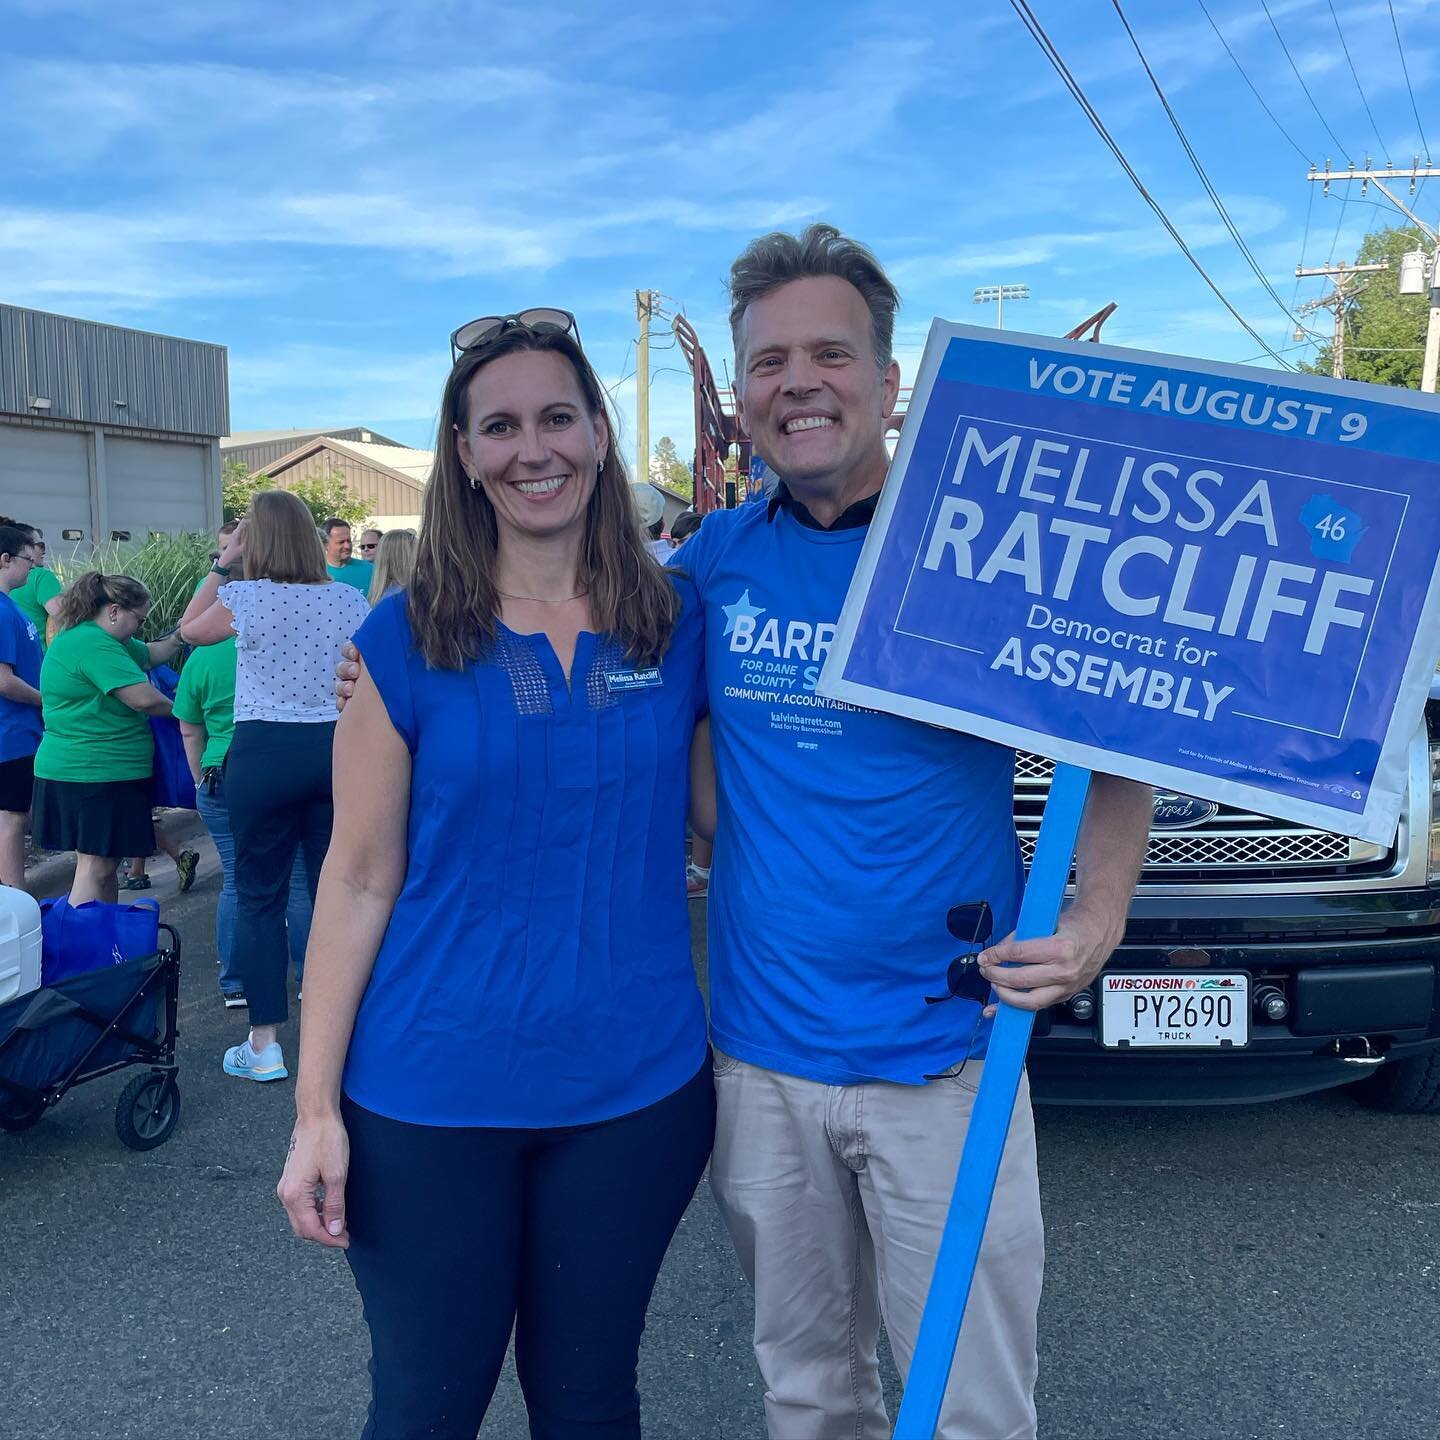 Let&rsquo;s support Melissa Ratcliff and our Democratic candidates across the state in the fall general election! #election #democrat #democracy